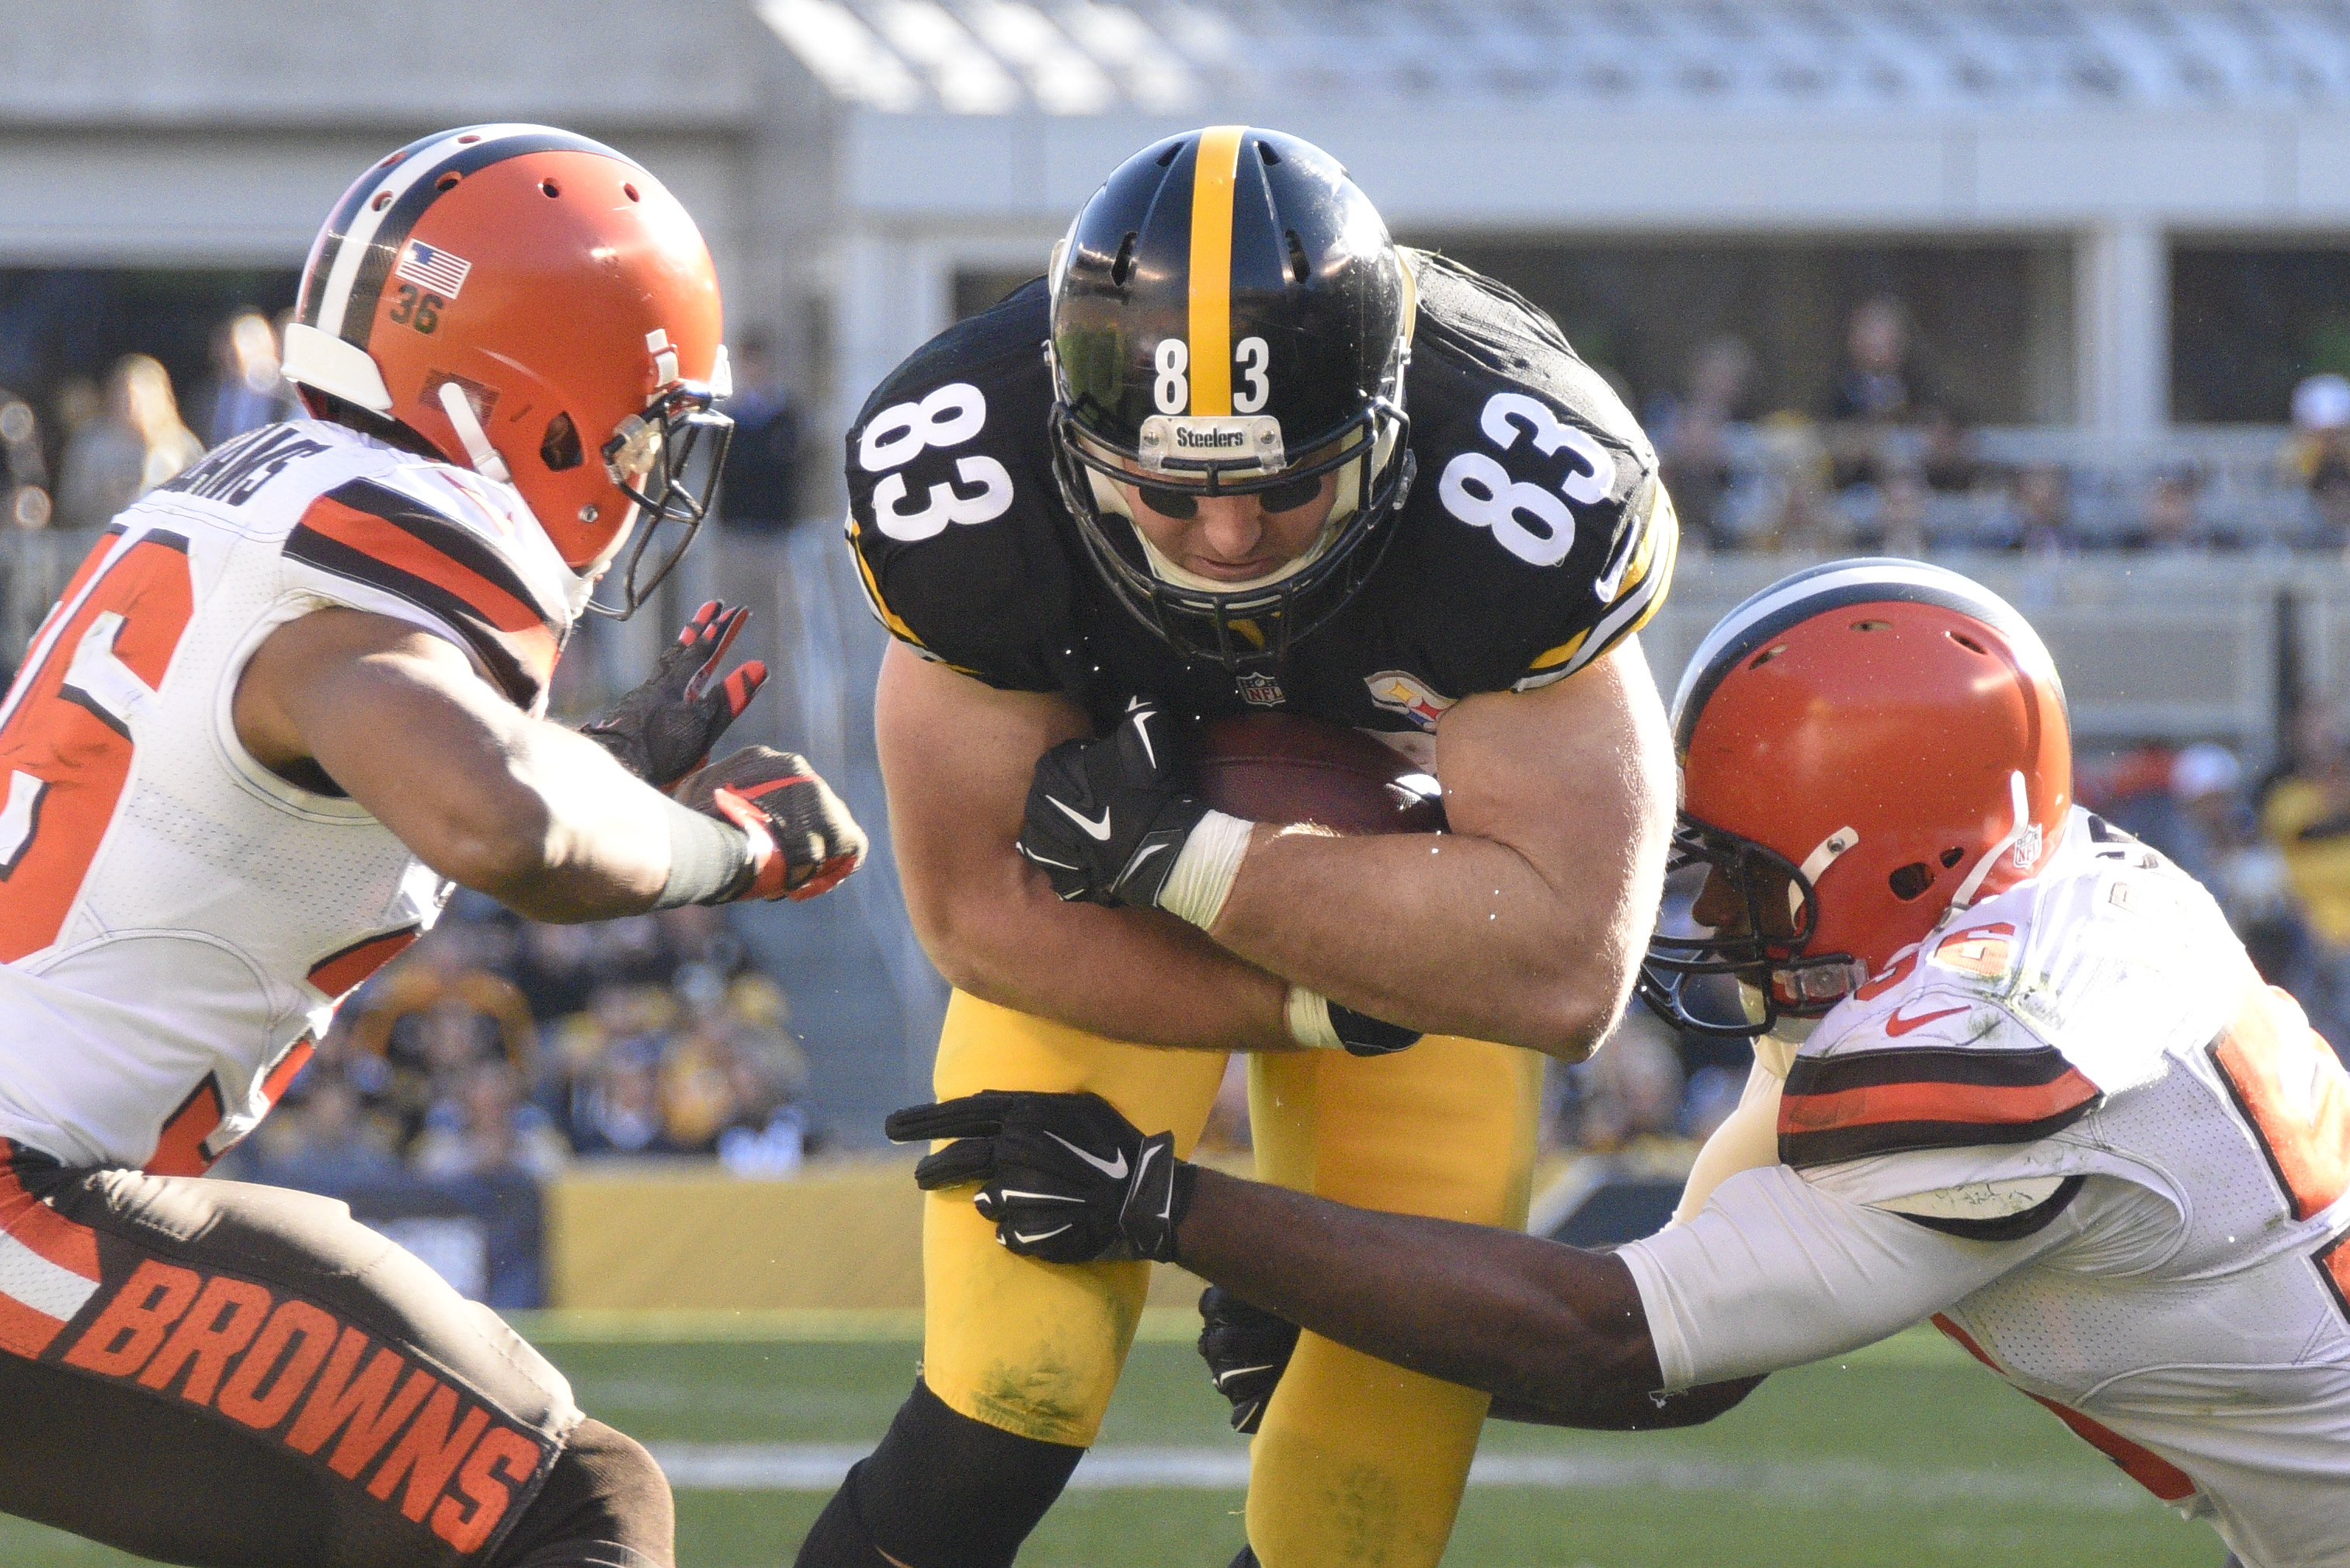 Heath Miller named to Virginia Sports Hall of Fame